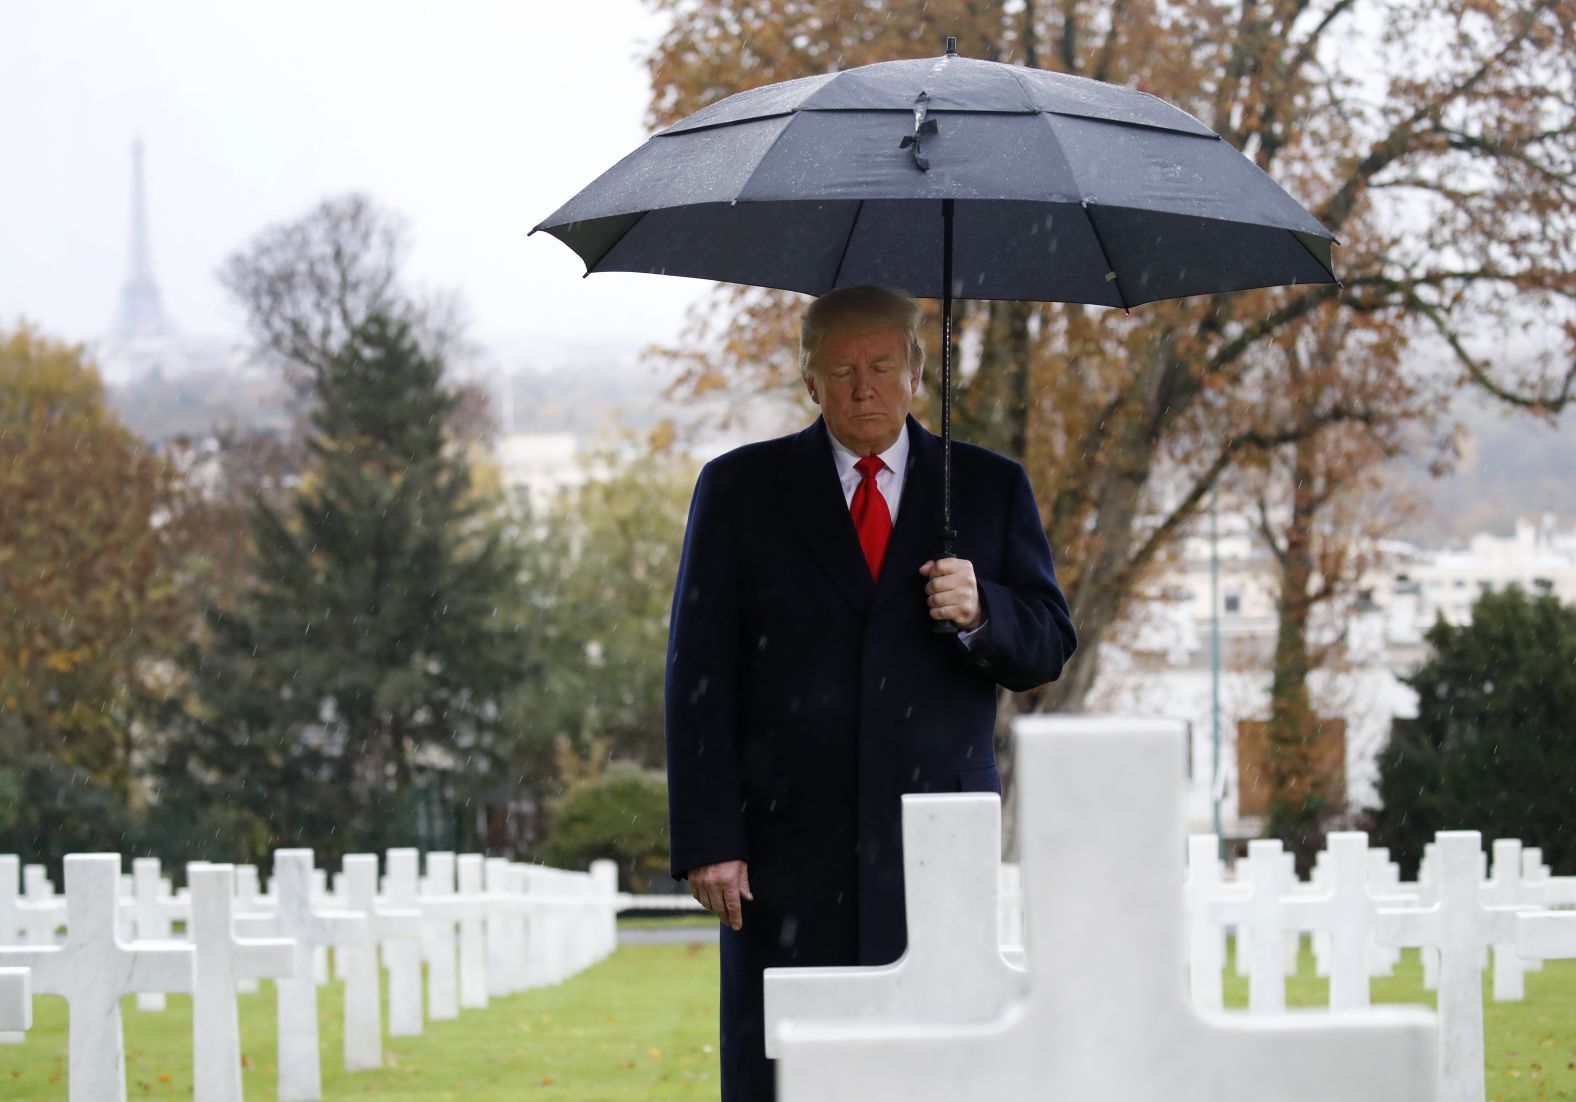 Trump visits the Suresnes American Cemetery, outside Paris, on Veterans Day. Trump was in France along with other world leaders to mark <a href="https://www.cnn.com/2018/11/11/europe/world-war-i-armistice-centenary-intl/index.html" target="_blank">the 100th anniversary of the World War I armistice.</a>